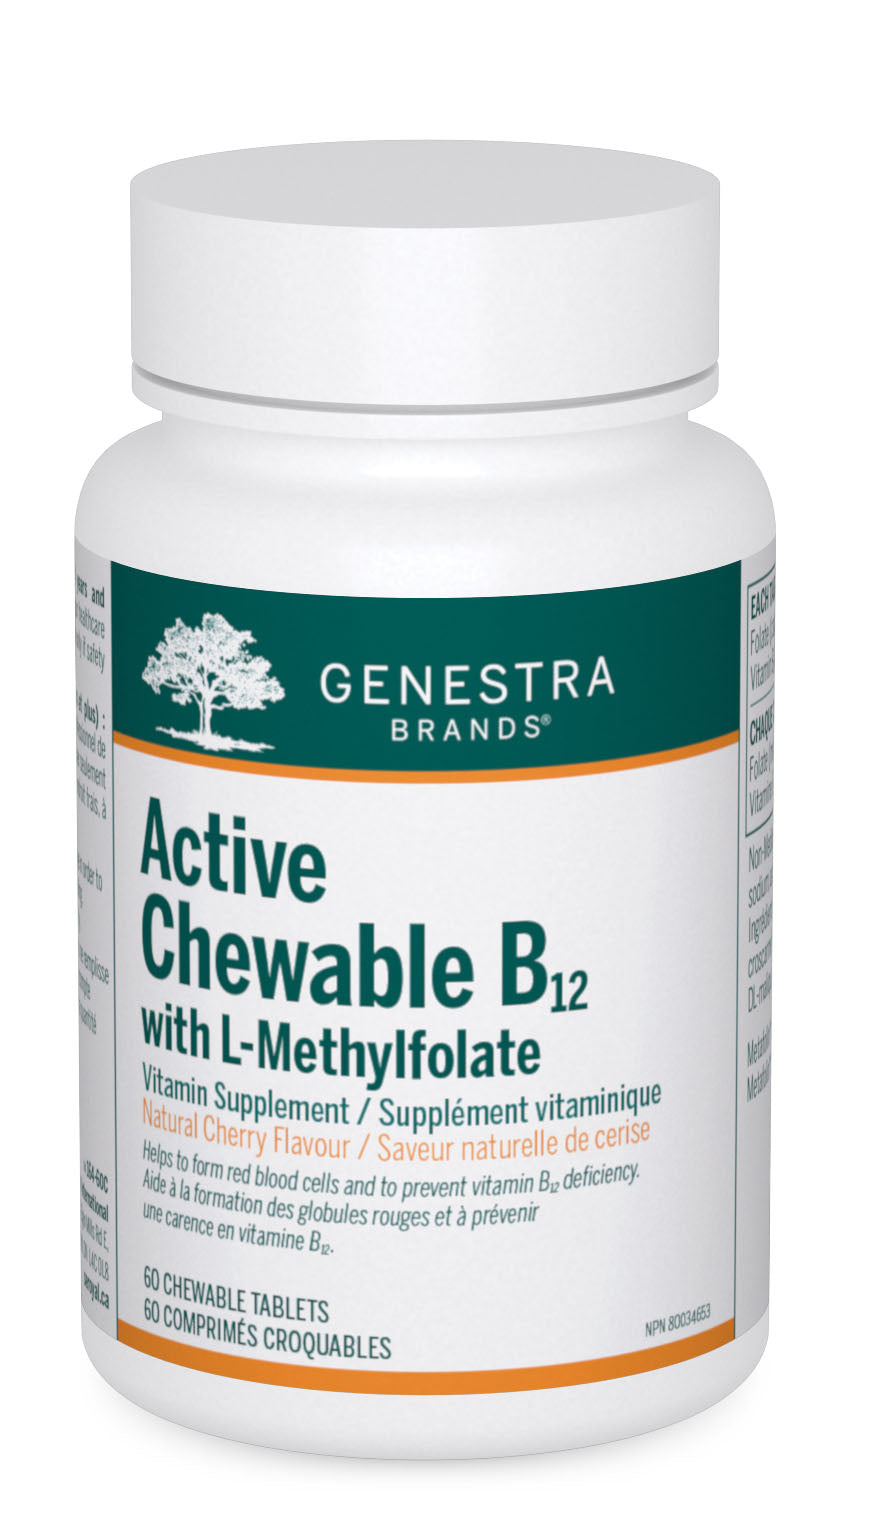 GENESTRA Active Chewable B12+L-Methylfolate (60 tabs)